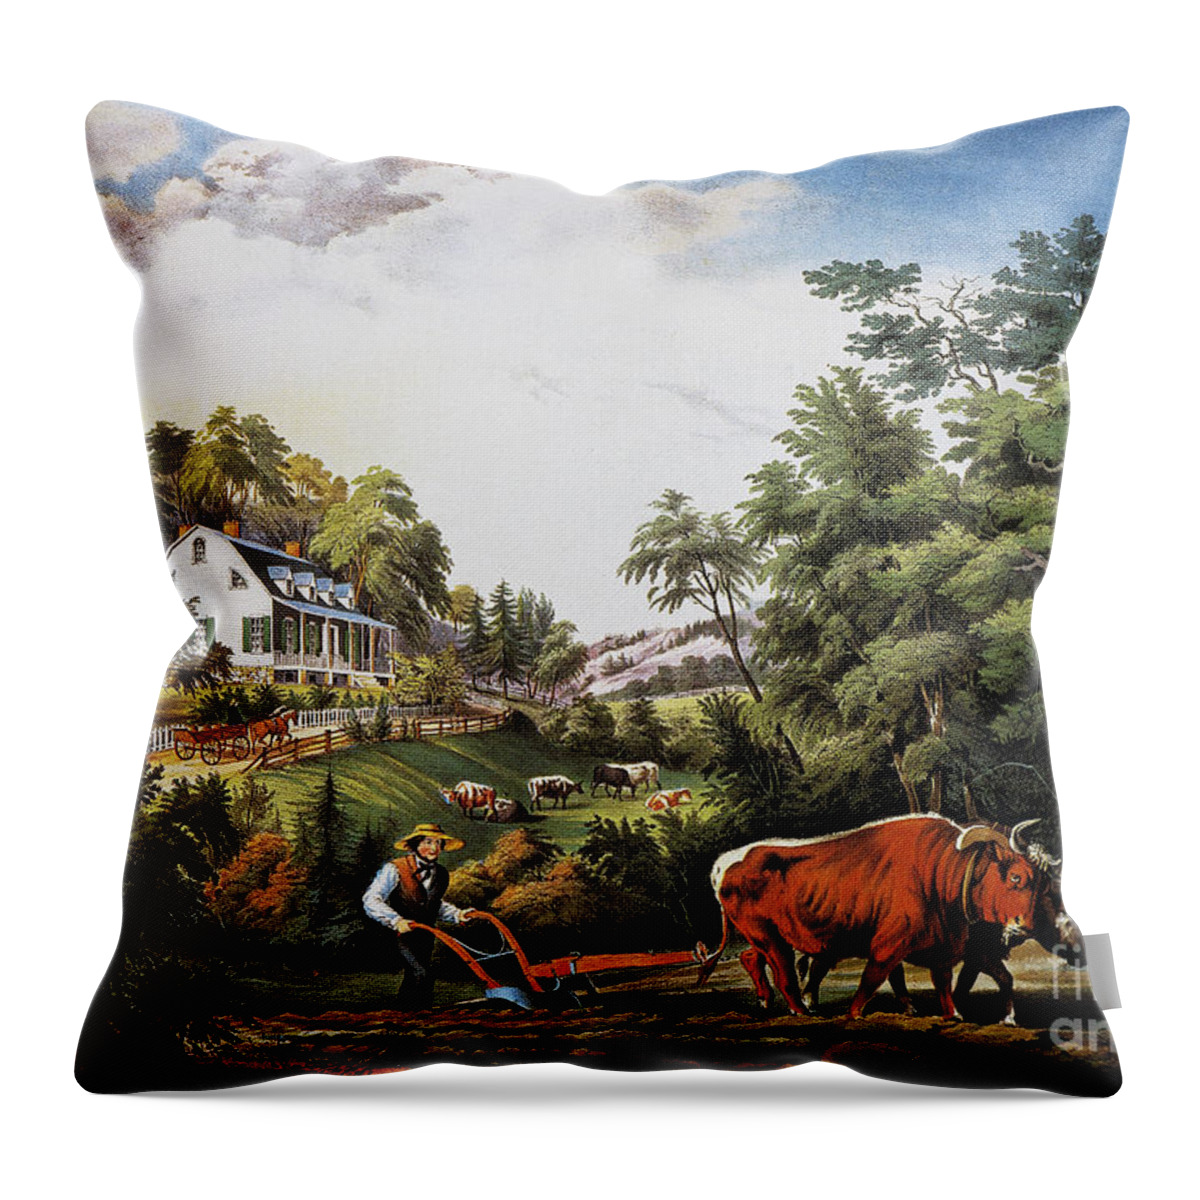 1853 Throw Pillow featuring the photograph American Farm Scene, 1853 by Granger